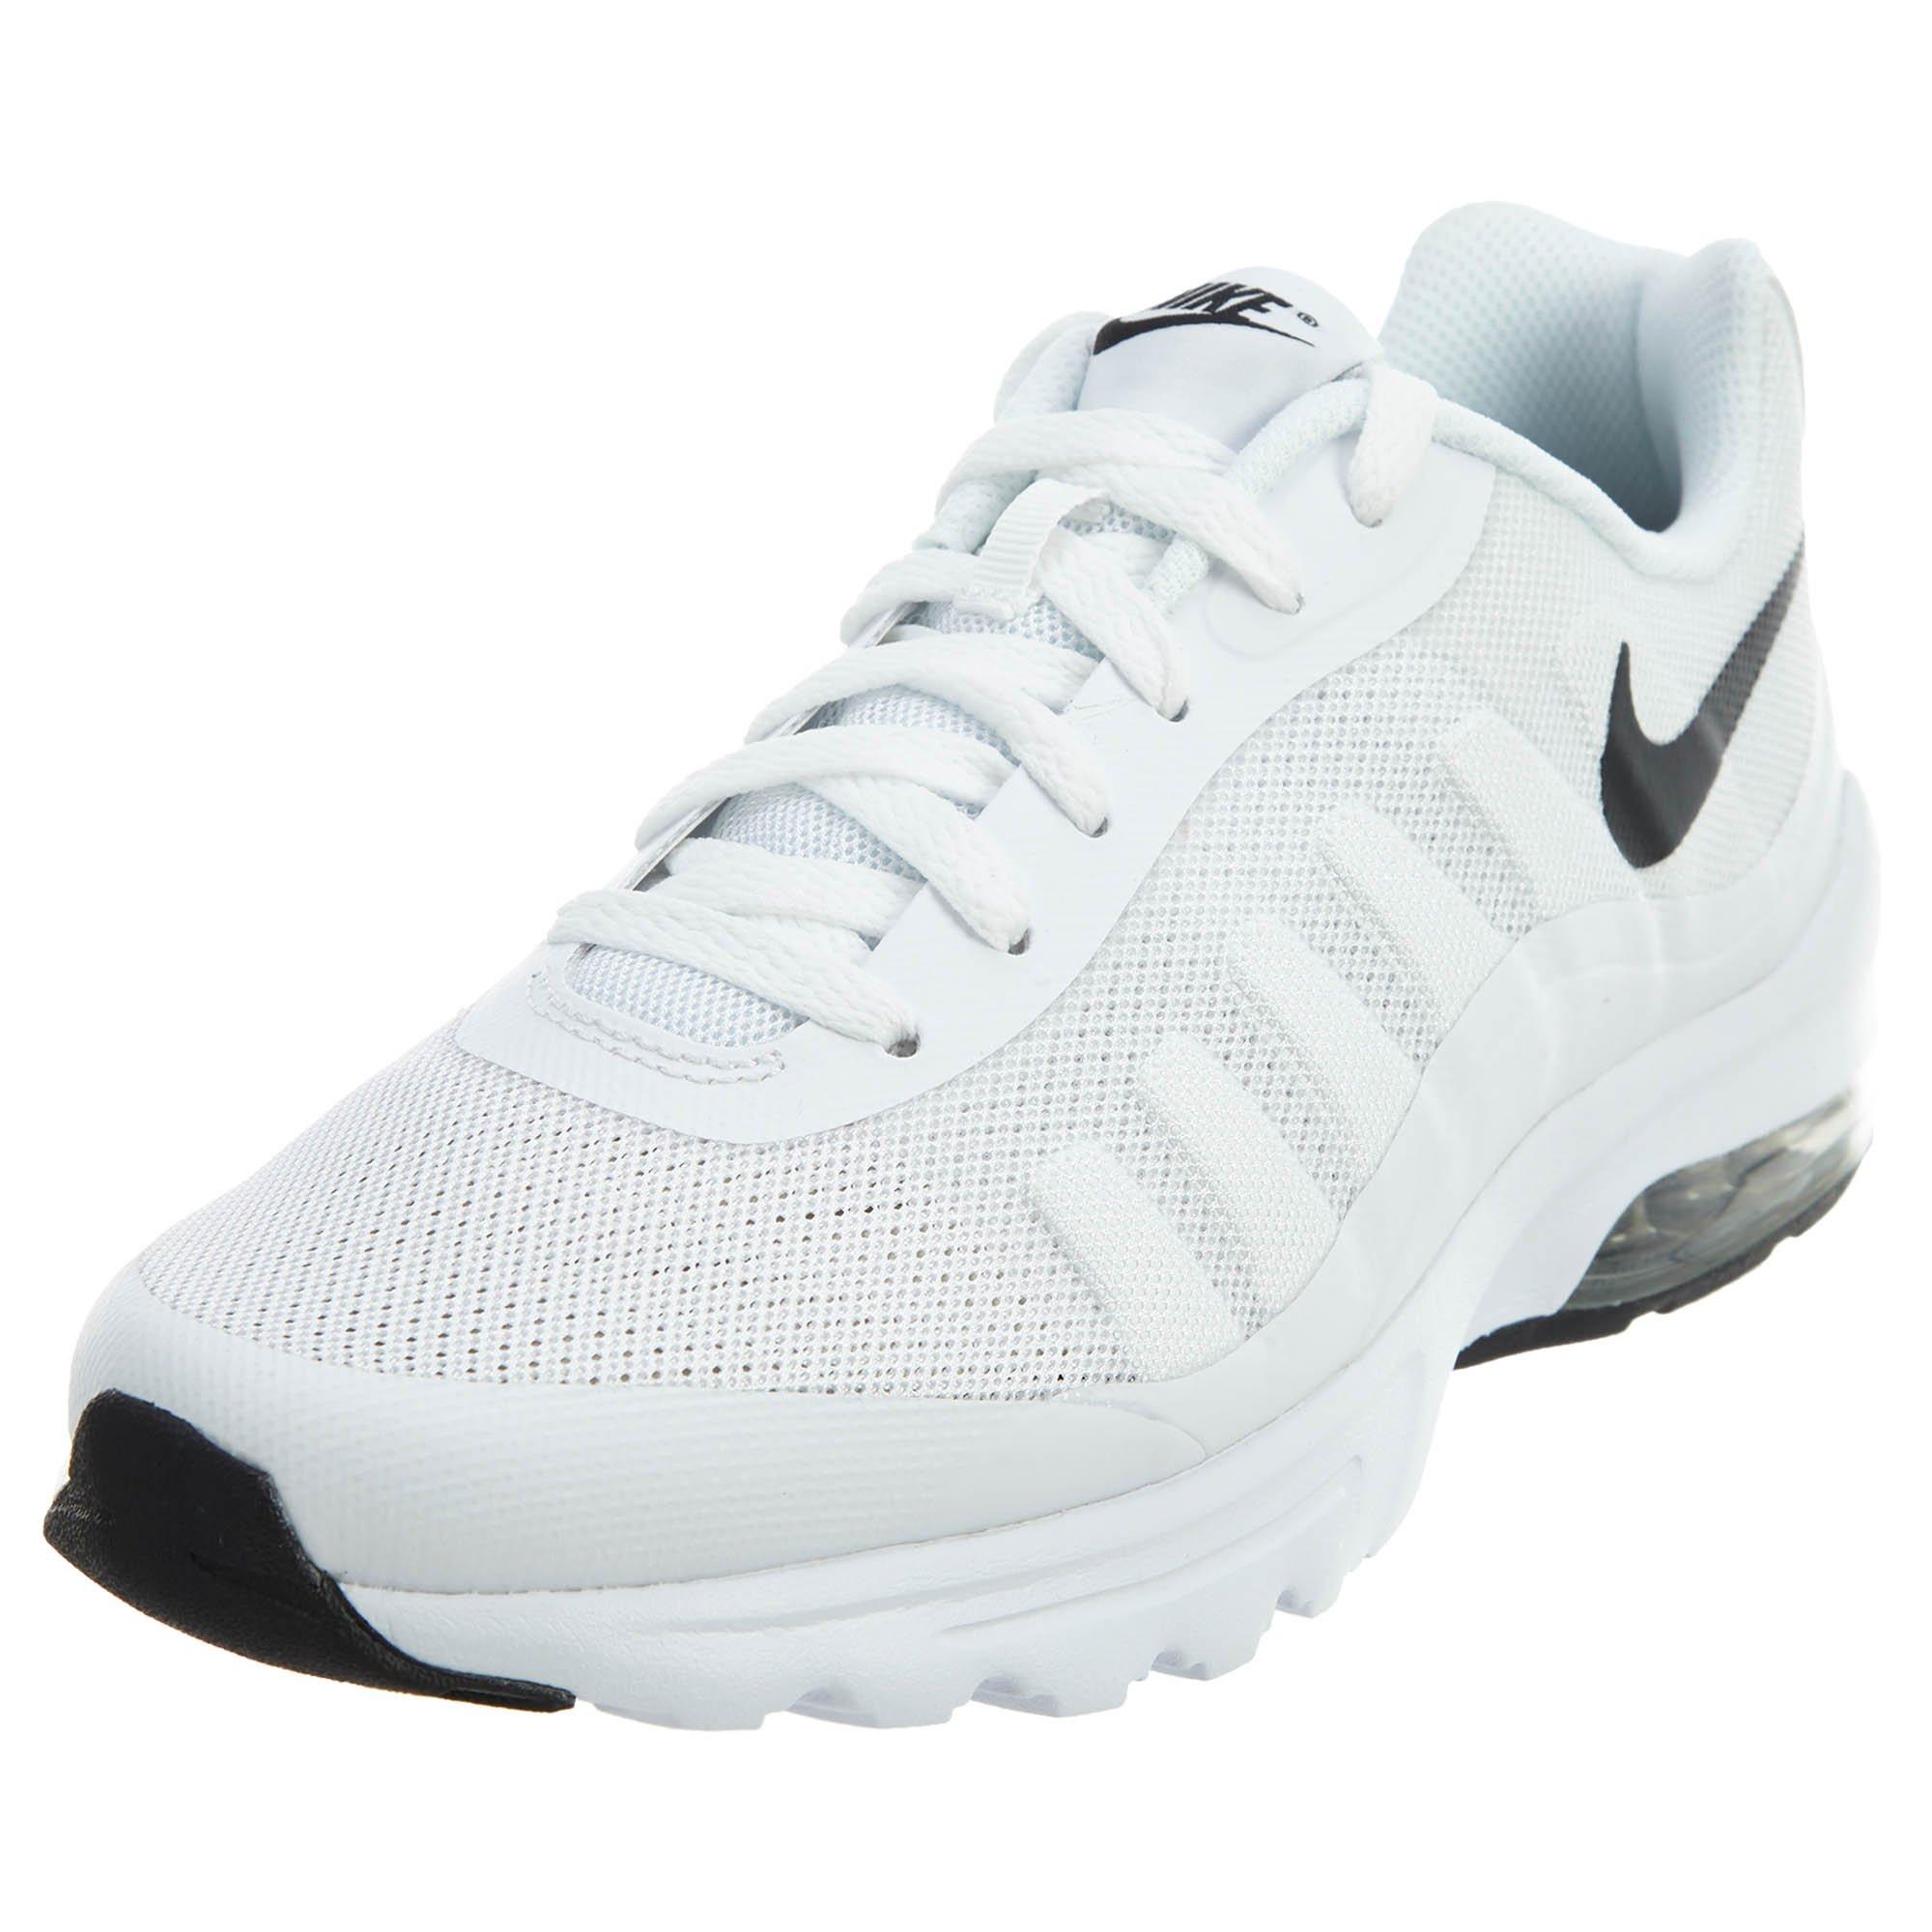 Nike Air Max Invigor Shoe in White for Men - Save 62% - Lyst